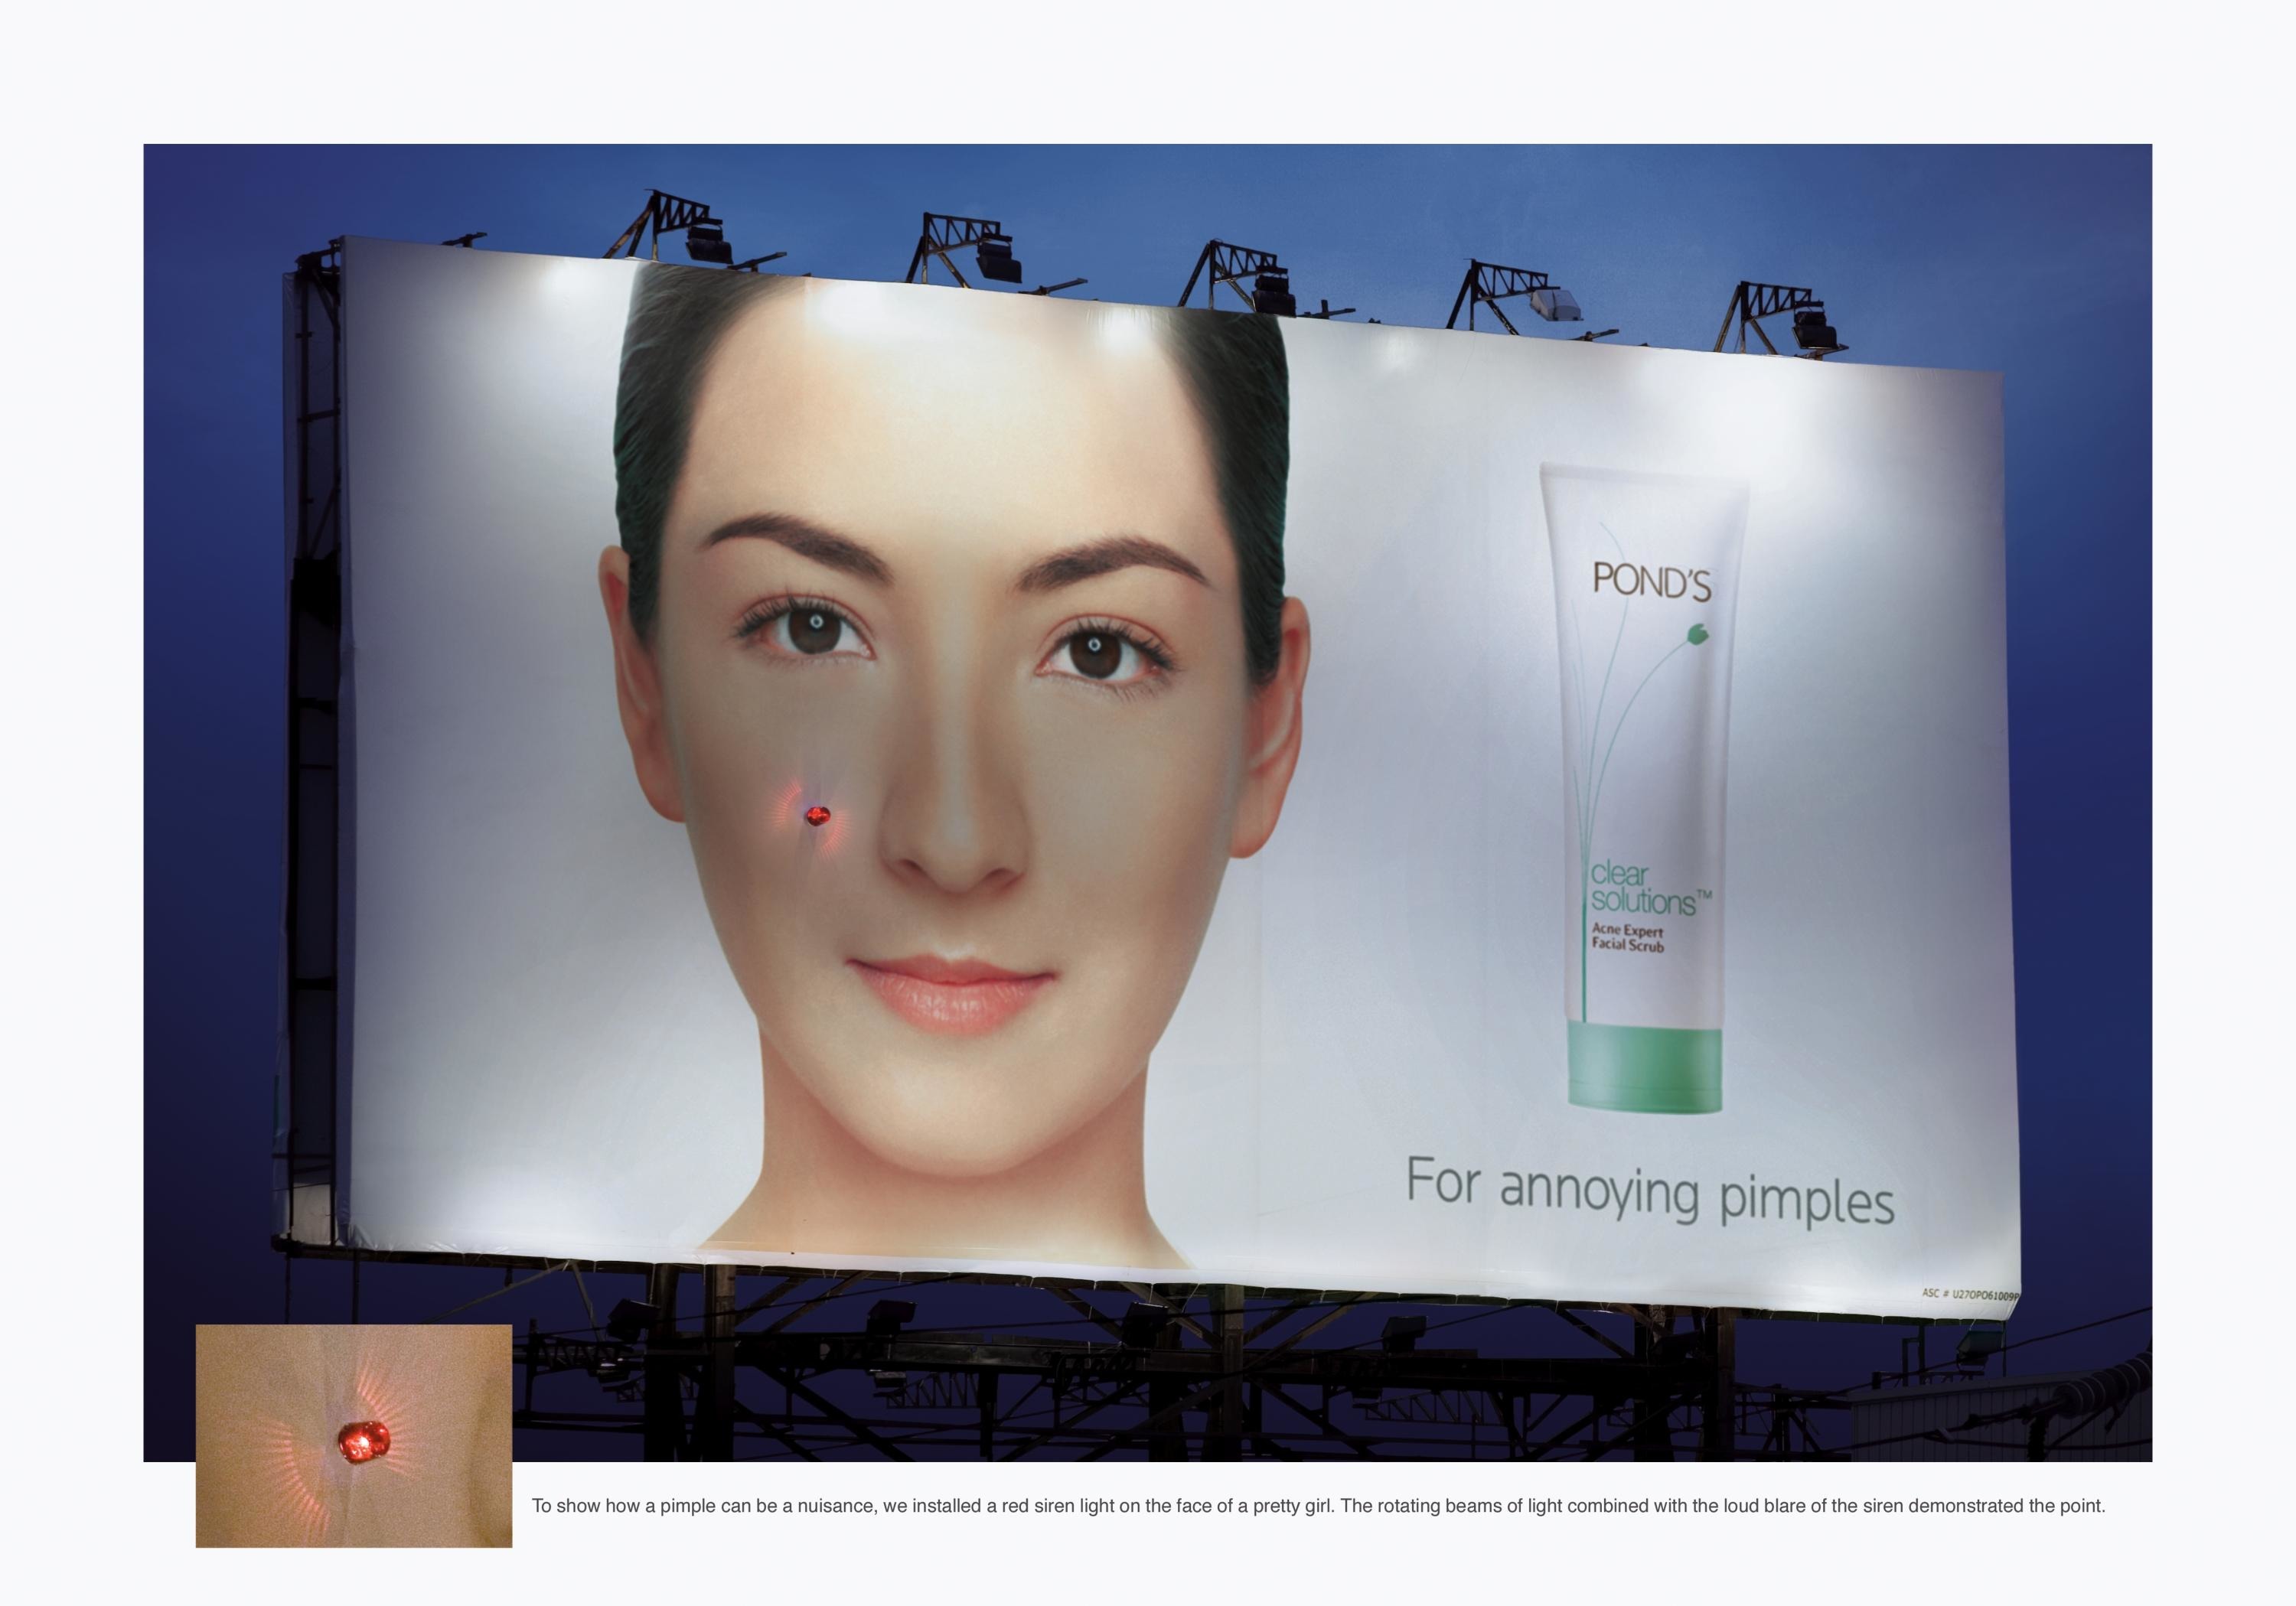 POND'S CLEAR SOLUTIONS